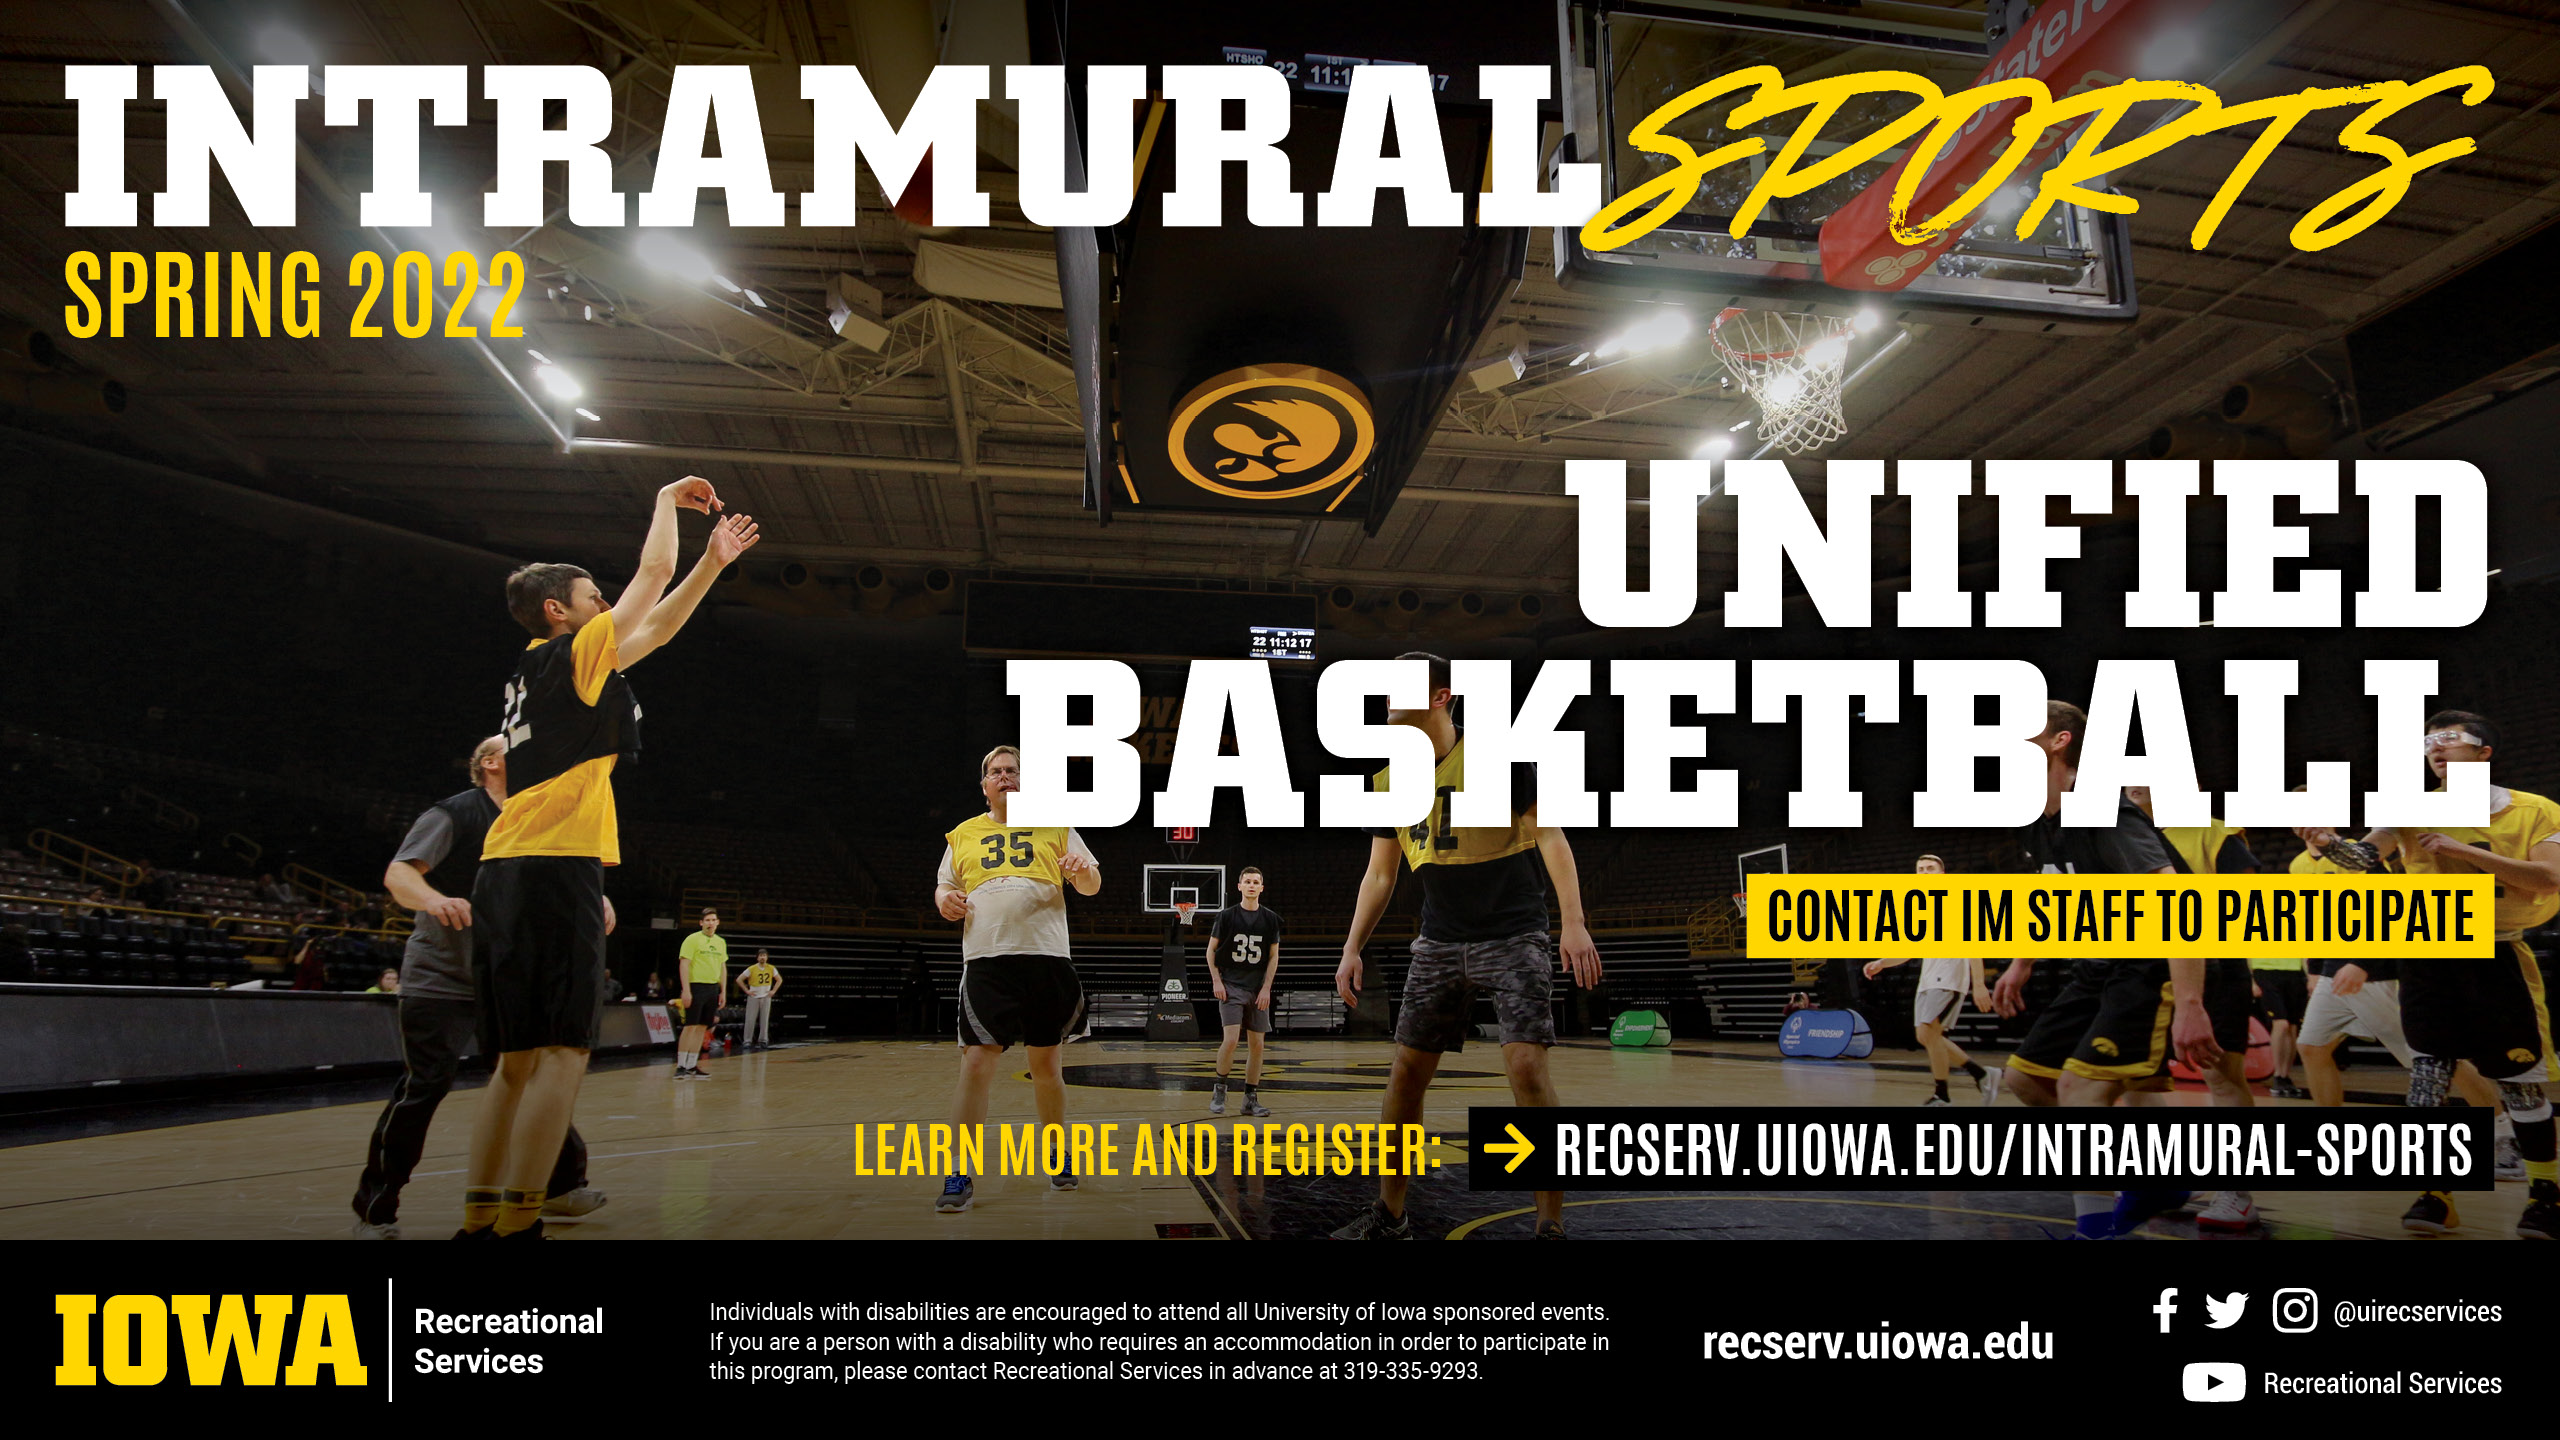 Intramural Sports Spring 2022 Unified Basketball Contact IM Staff to Participate  learn more and register at: recserv.uiowa.edu/intramural-sports